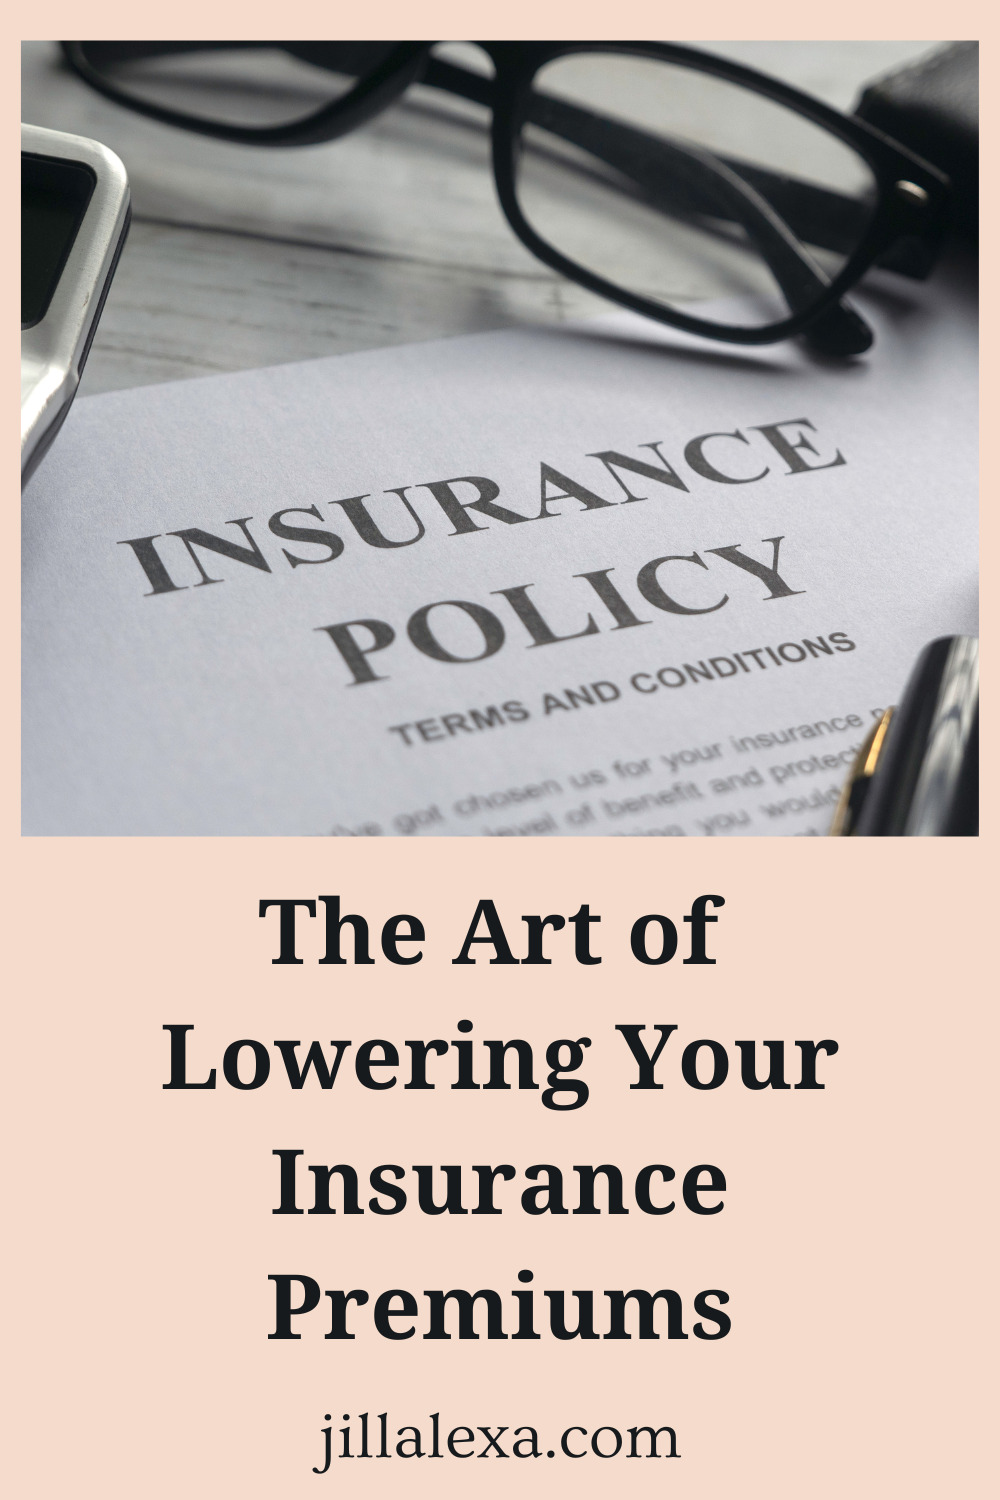 Nobody enjoys overspending; that goes double for insurance premiums. This is the art of lowering your insurance premiums.